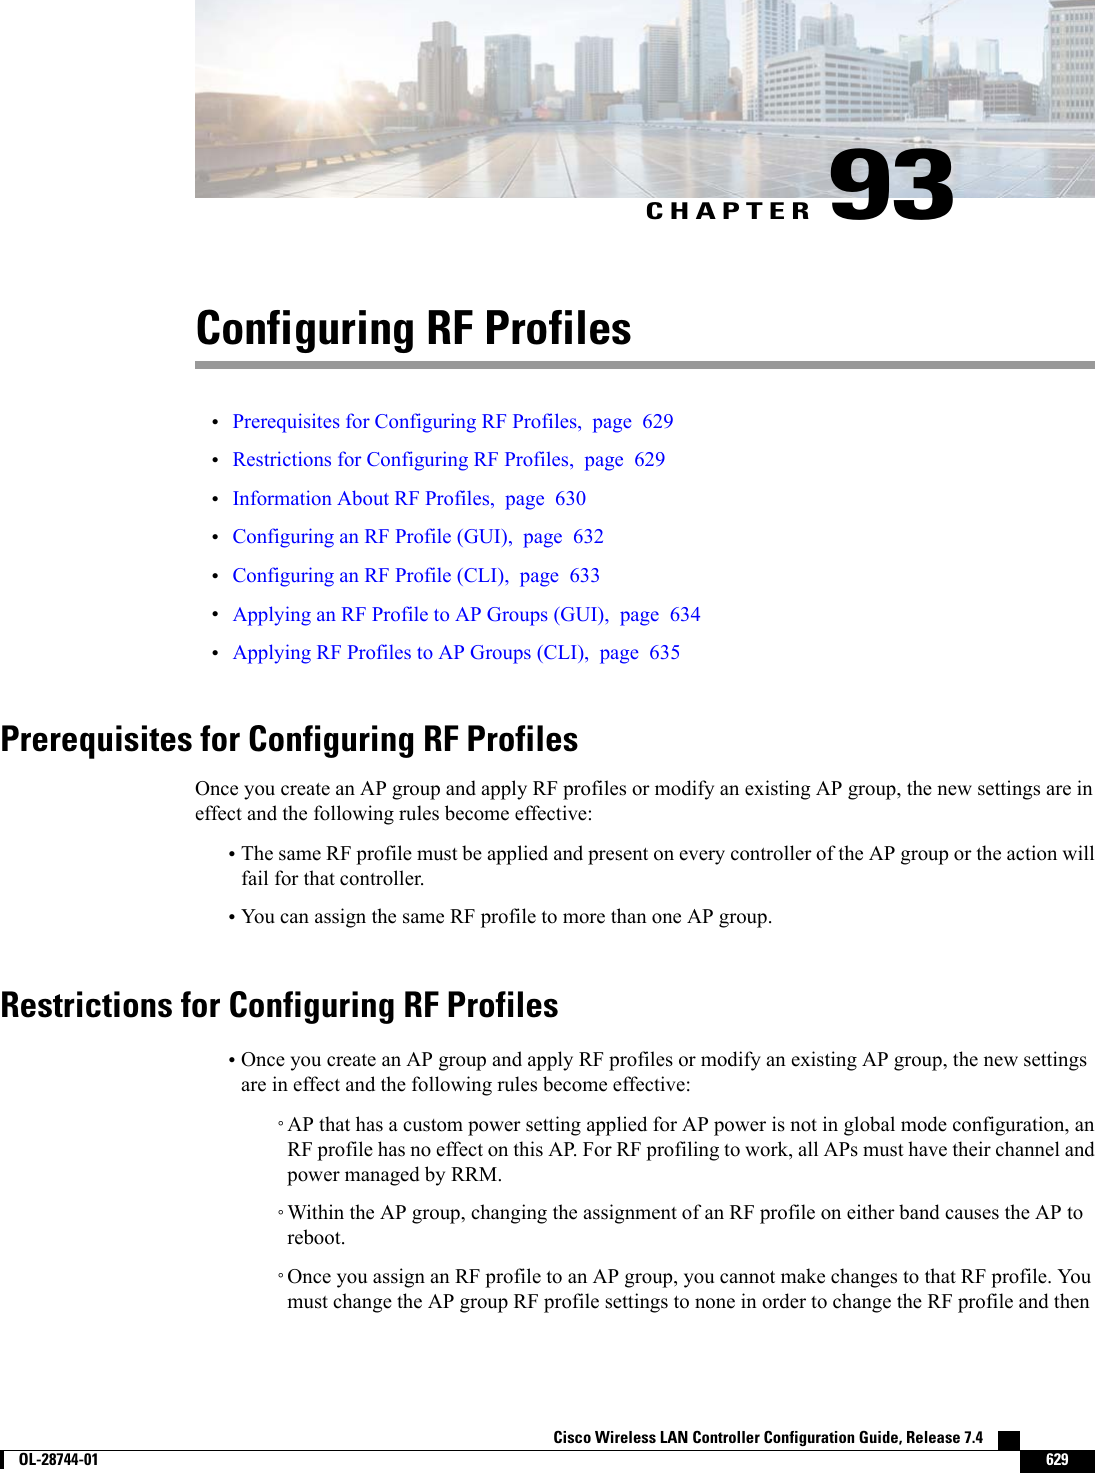 CHAPTER 93Configuring RF Profiles•Prerequisites for Configuring RF Profiles, page 629•Restrictions for Configuring RF Profiles, page 629•Information About RF Profiles, page 630•Configuring an RF Profile (GUI), page 632•Configuring an RF Profile (CLI), page 633•Applying an RF Profile to AP Groups (GUI), page 634•Applying RF Profiles to AP Groups (CLI), page 635Prerequisites for Configuring RF ProfilesOnce you create an AP group and apply RF profiles or modify an existing AP group, the new settings are ineffect and the following rules become effective:•The same RF profile must be applied and present on every controller of the AP group or the action willfail for that controller.•You can assign the same RF profile to more than one AP group.Restrictions for Configuring RF Profiles•Once you create an AP group and apply RF profiles or modify an existing AP group, the new settingsare in effect and the following rules become effective:◦AP that has a custom power setting applied for AP power is not in global mode configuration, anRF profile has no effect on this AP. For RF profiling to work, all APs must have their channel andpower managed by RRM.◦Within the AP group, changing the assignment of an RF profile on either band causes the AP toreboot.◦Once you assign an RF profile to an AP group, you cannot make changes to that RF profile. Youmust change the AP group RF profile settings to none in order to change the RF profile and thenCisco Wireless LAN Controller Configuration Guide, Release 7.4        OL-28744-01 629